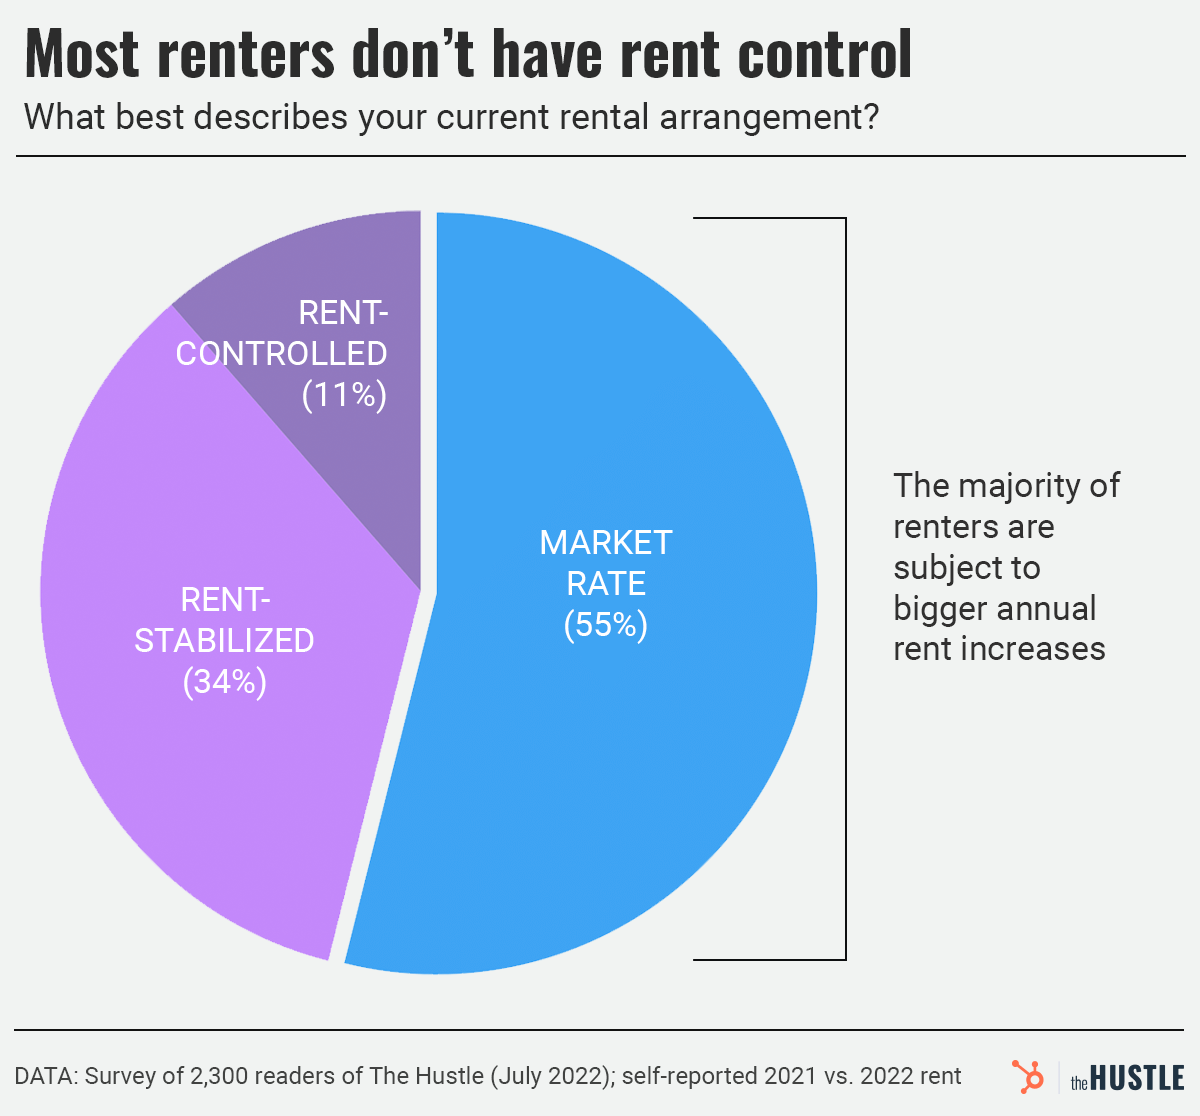 pie chart for percentage of those in the United States with rent control -11% and rent stabilization 34% and those without 55%.